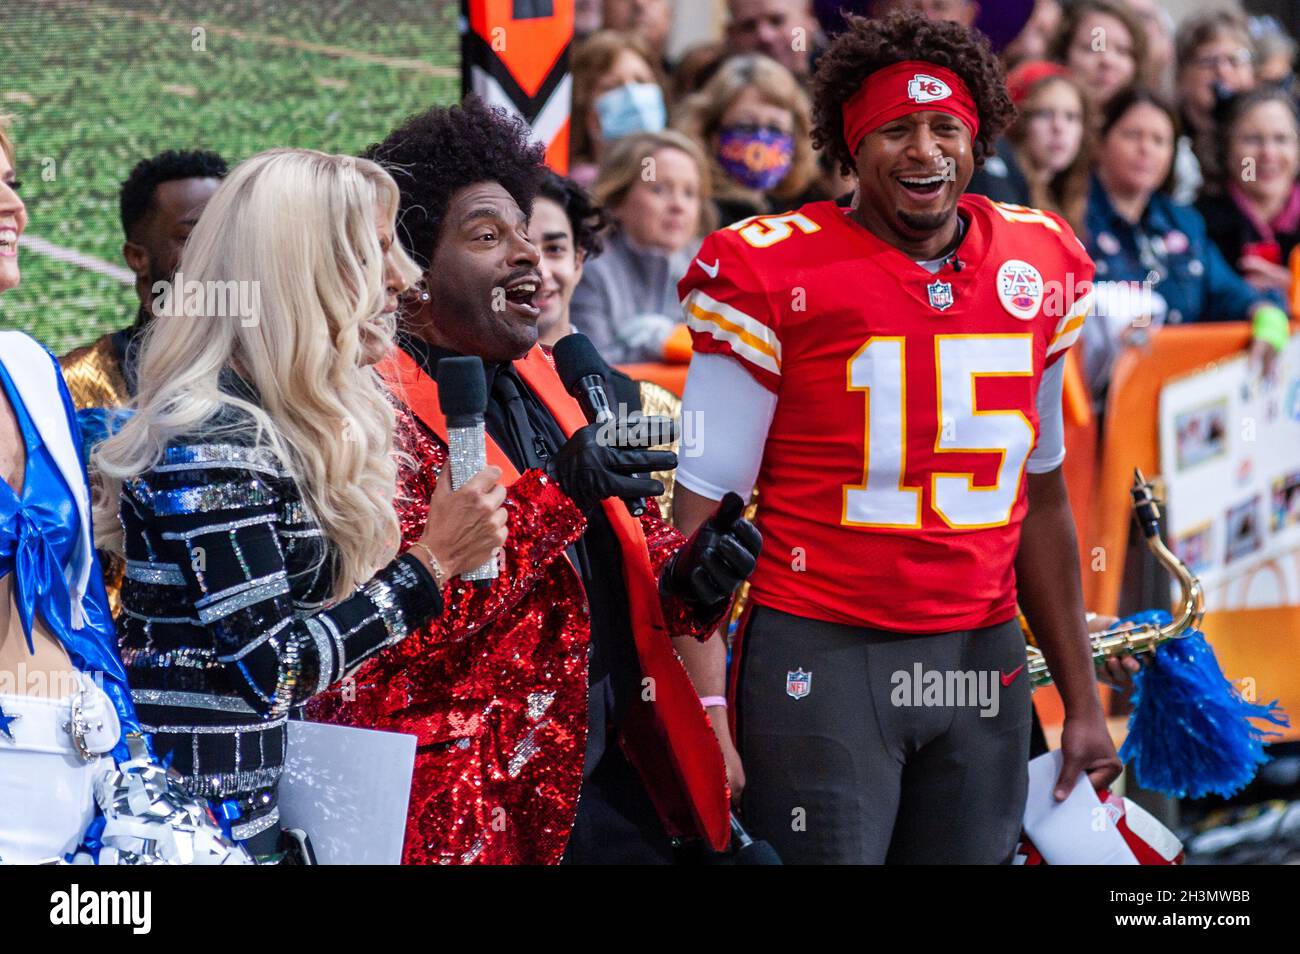 New York, USA. 29th Oct, 2021. Hoda Kotb dressed as Carrie Underwood, Al Roker as The Weeknd, and Craig Melvin as Kansas City Chiefs quarterback Patrick Mahomes, celebrate Halloween with Football' Fright' at NBC's 30 Rock in New York, New York, on Oct. 29, 2021. (Photo by Gabriele Holtermann/Sipa USA) Credit: Sipa USA/Alamy Live News Stock Photo